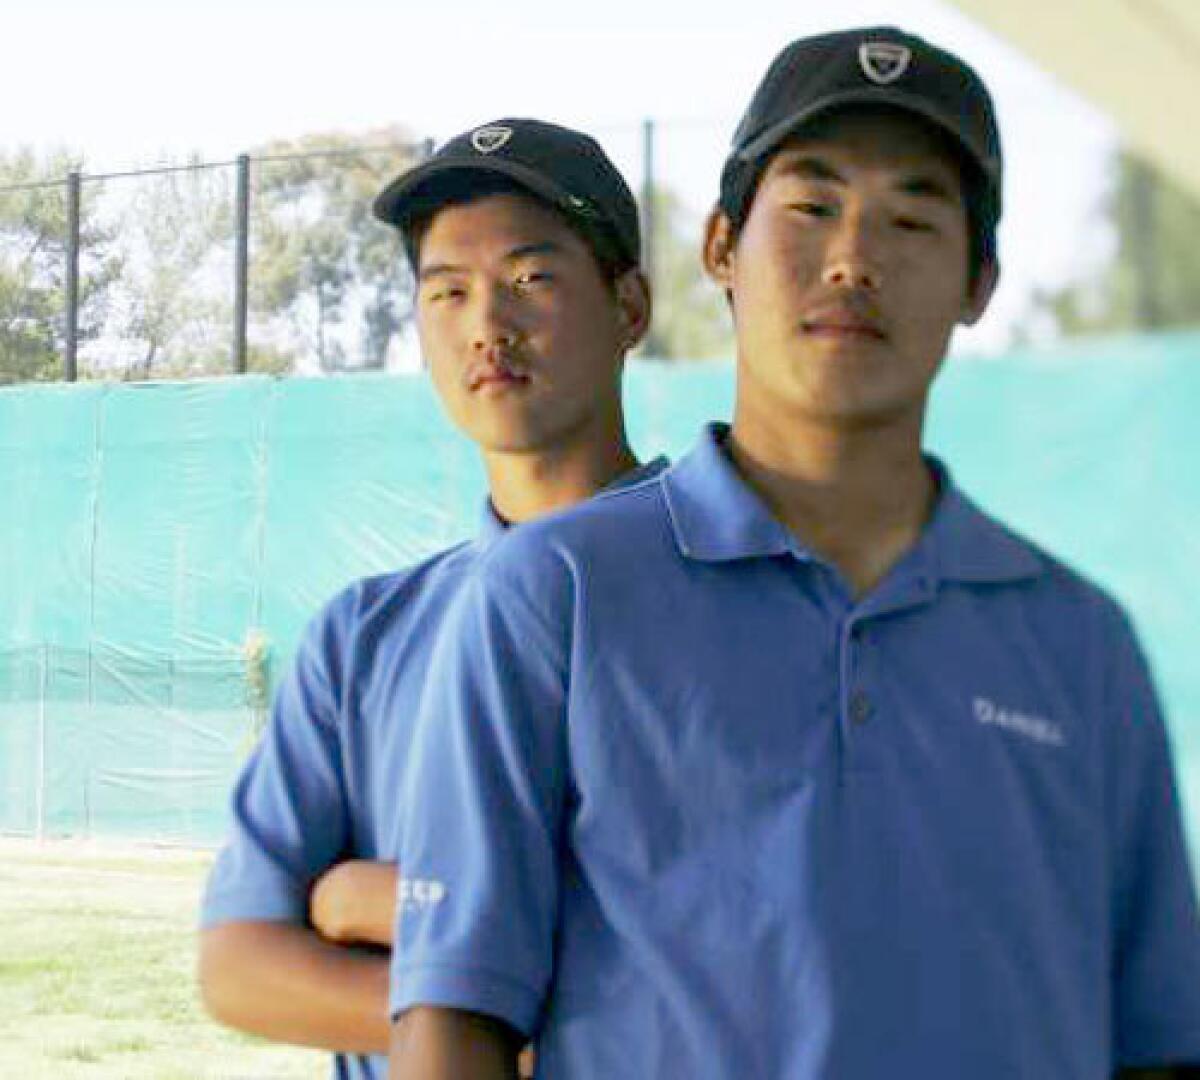 LACES fell short of a regional berth, finishing fifth despite the efforts of Daniel Park, right, and Tom Lo, who finished runner-up to his teammate.